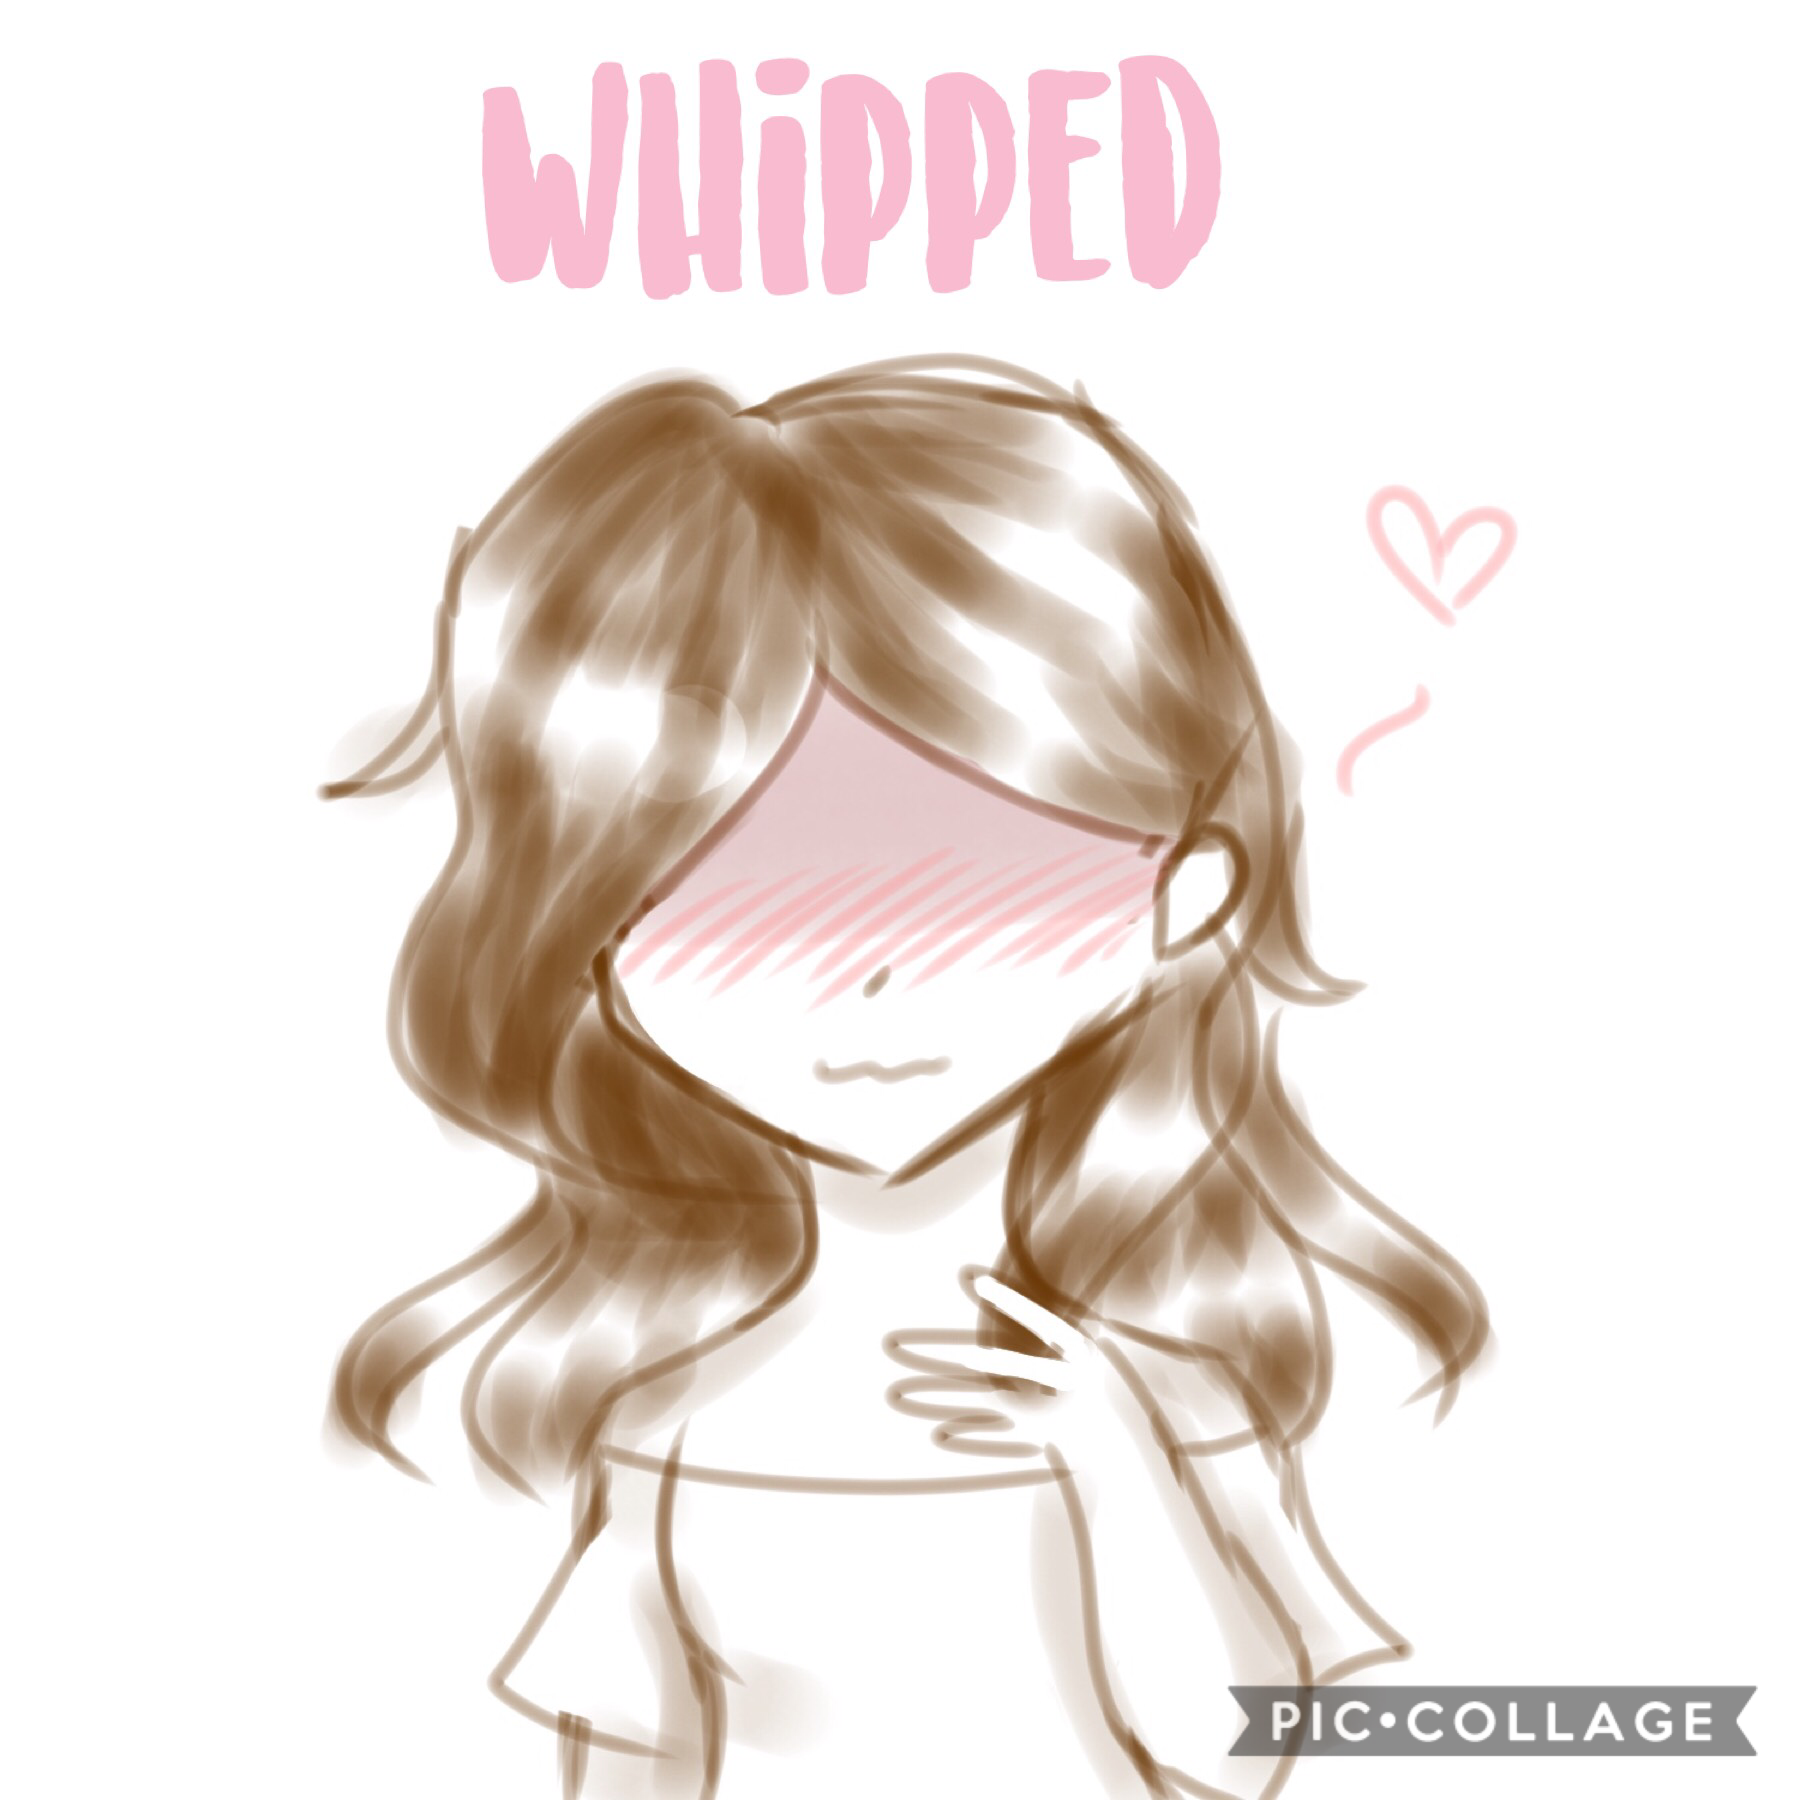 Whipped (this is my drawing 💕)